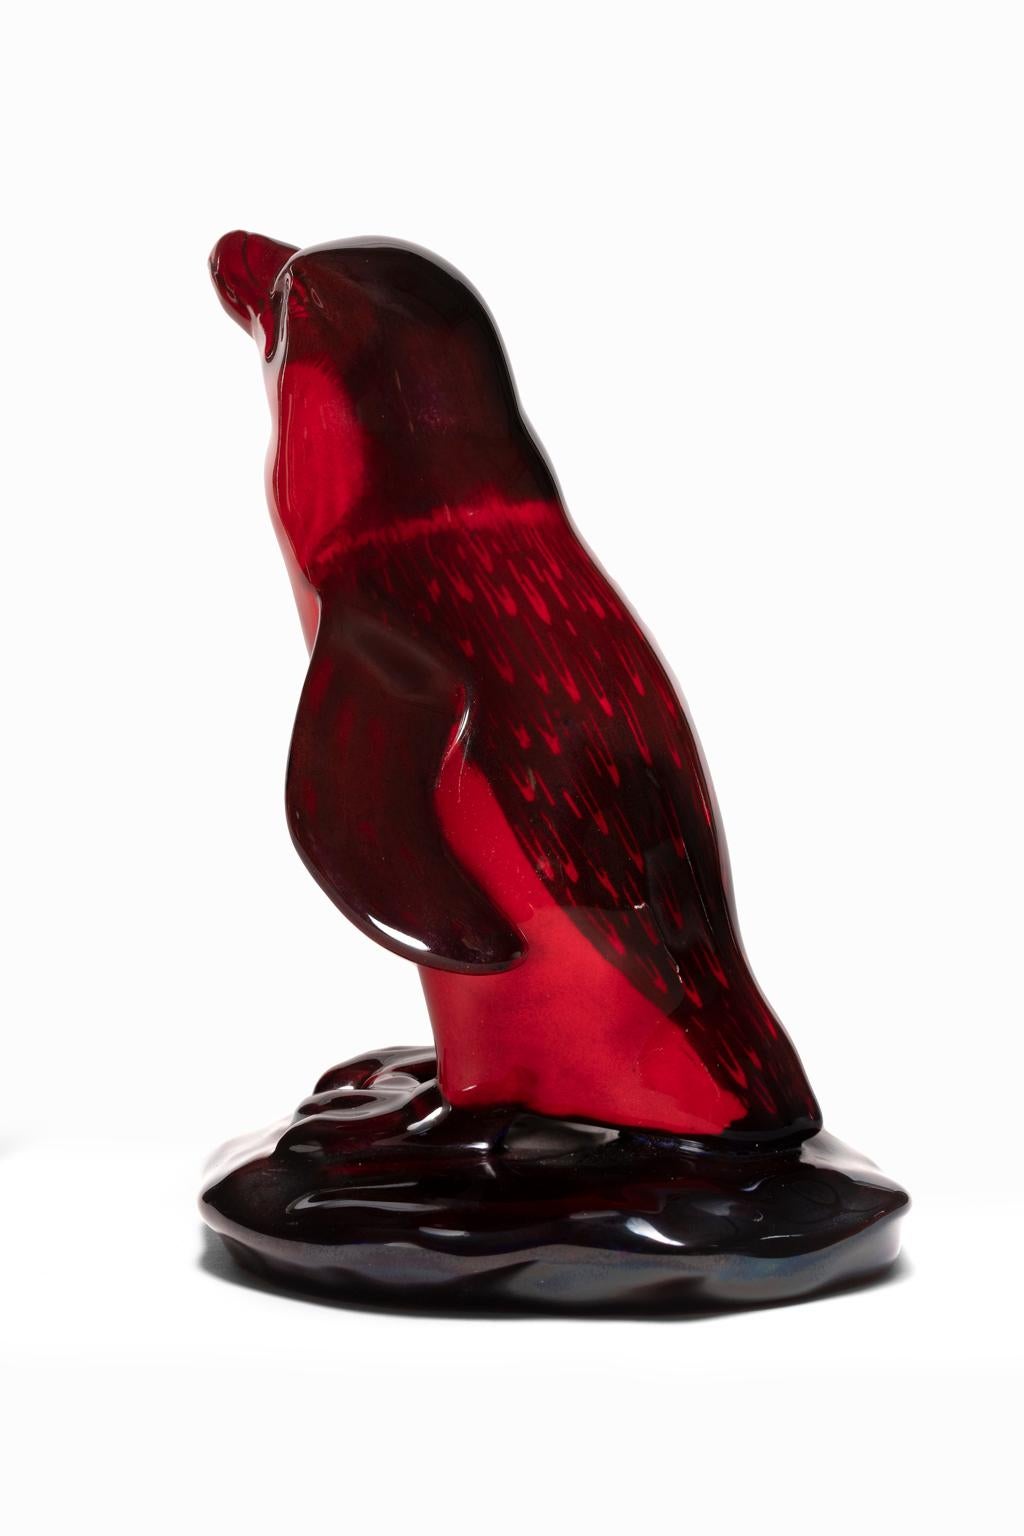  Royal Doulton Red Flambe Porcelain Figurine 